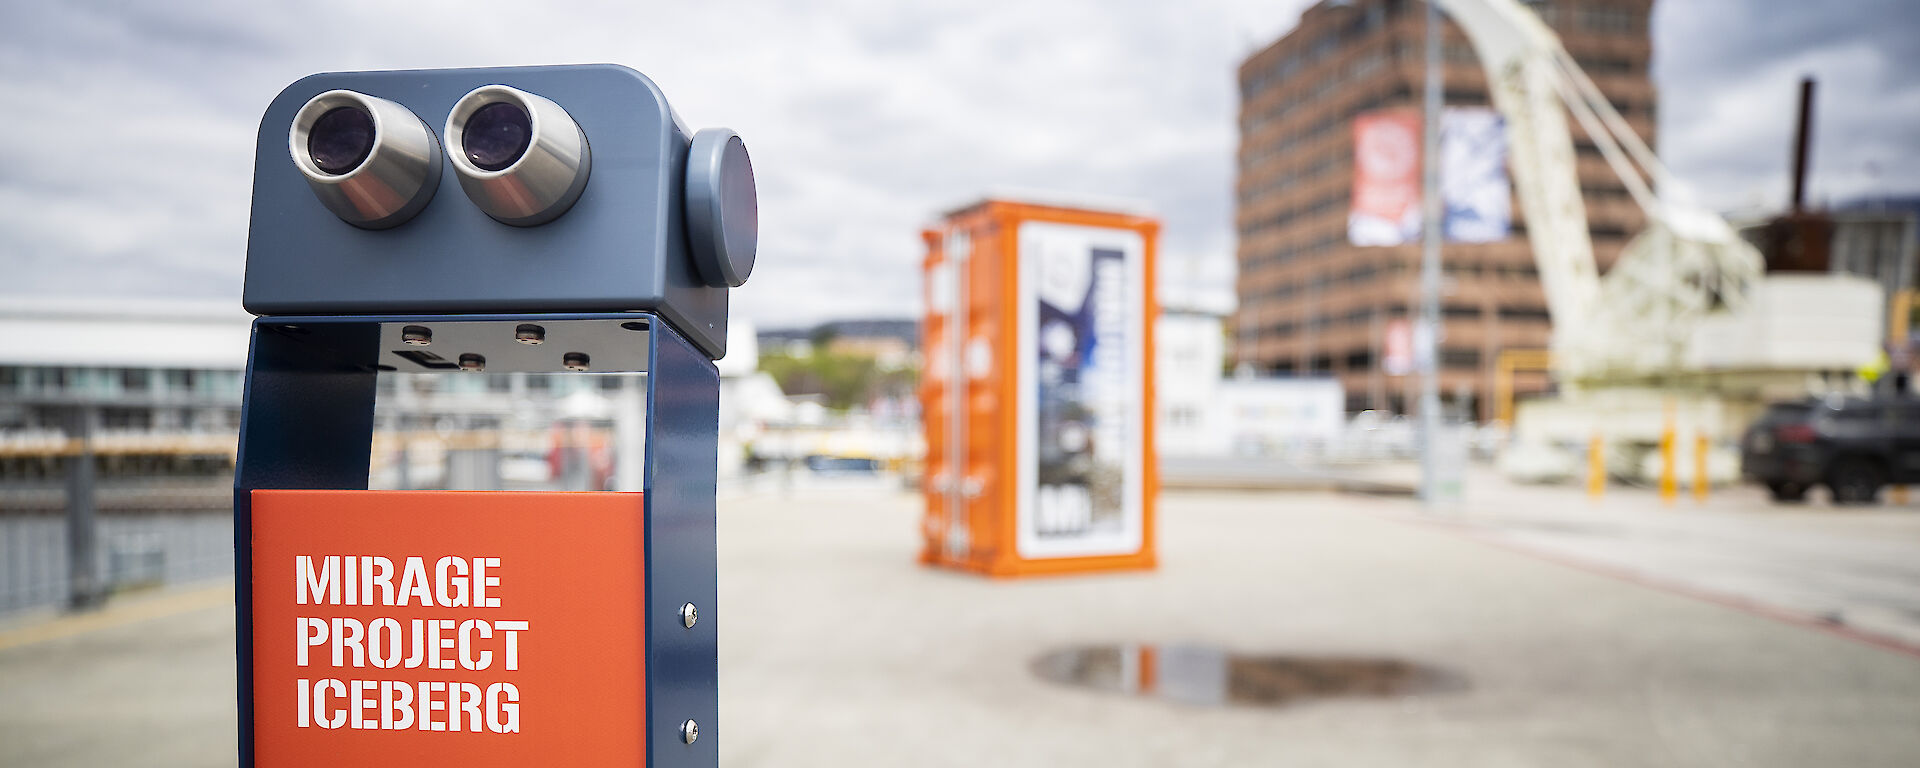 Binoculars installed at the Hobart waterfront. The sign says "This is a meeting between physical and psychological landscapes".